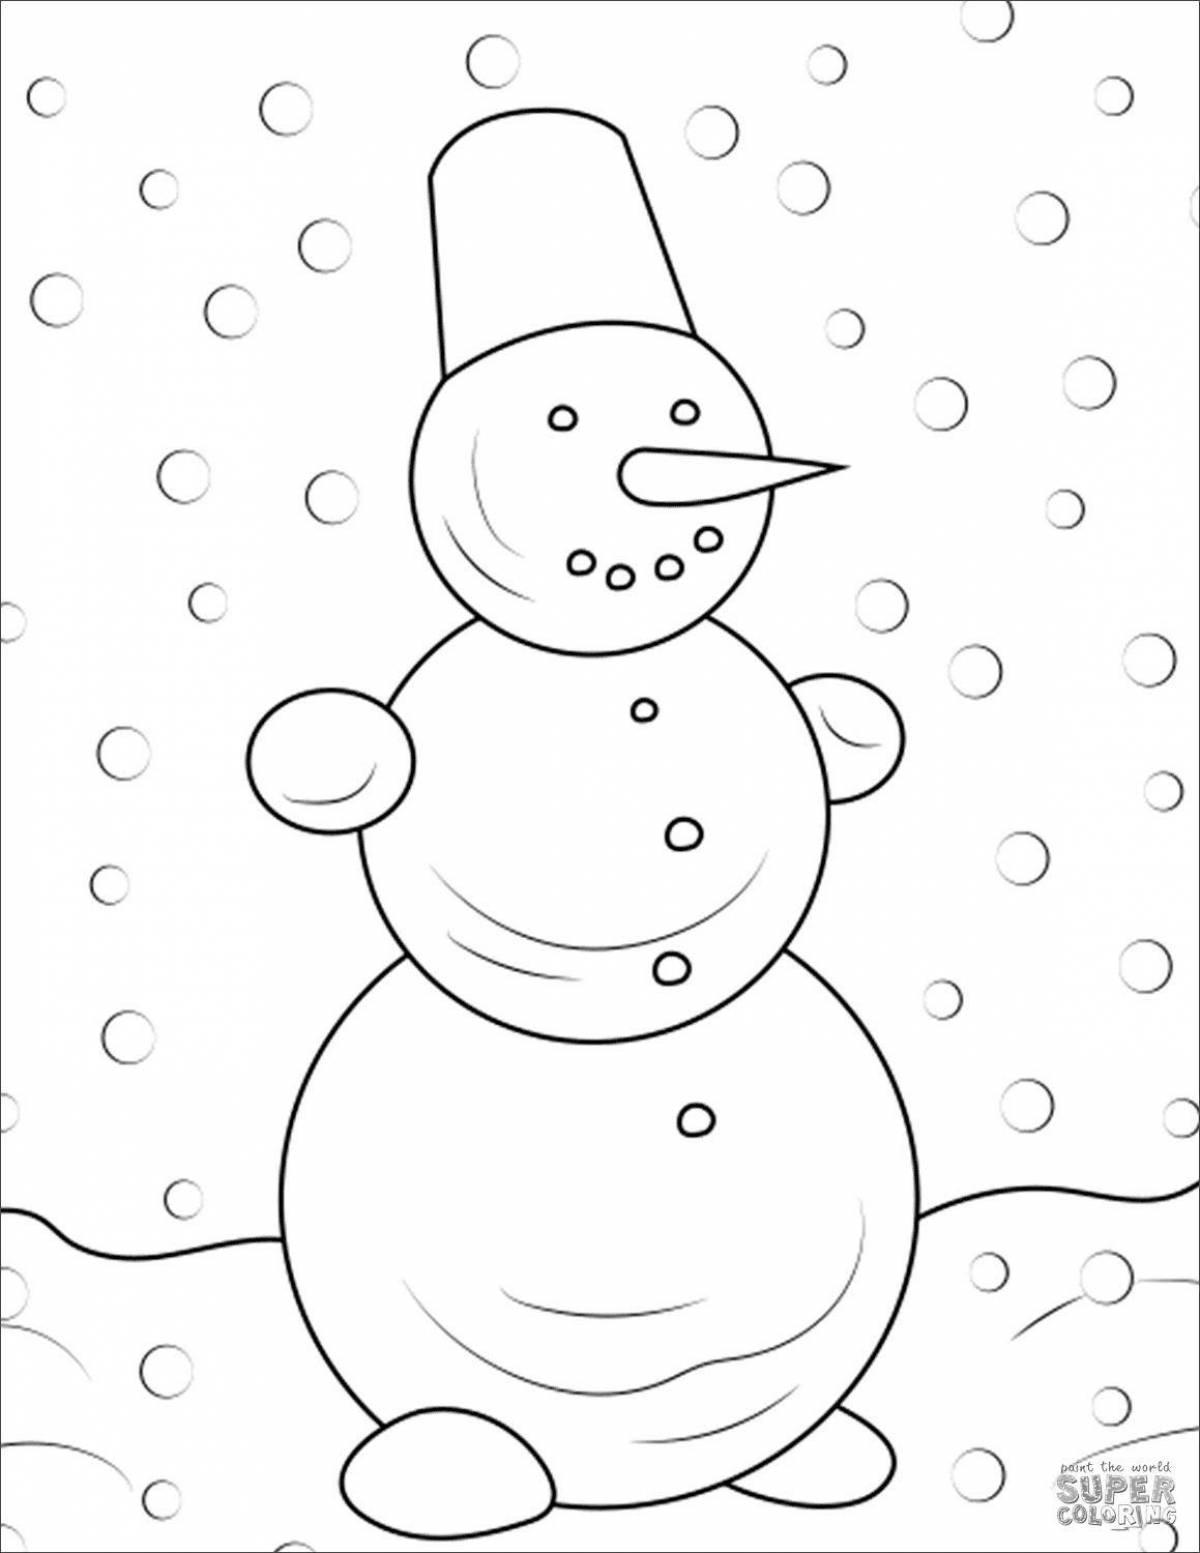 Cute snowman coloring book for kids 3 4